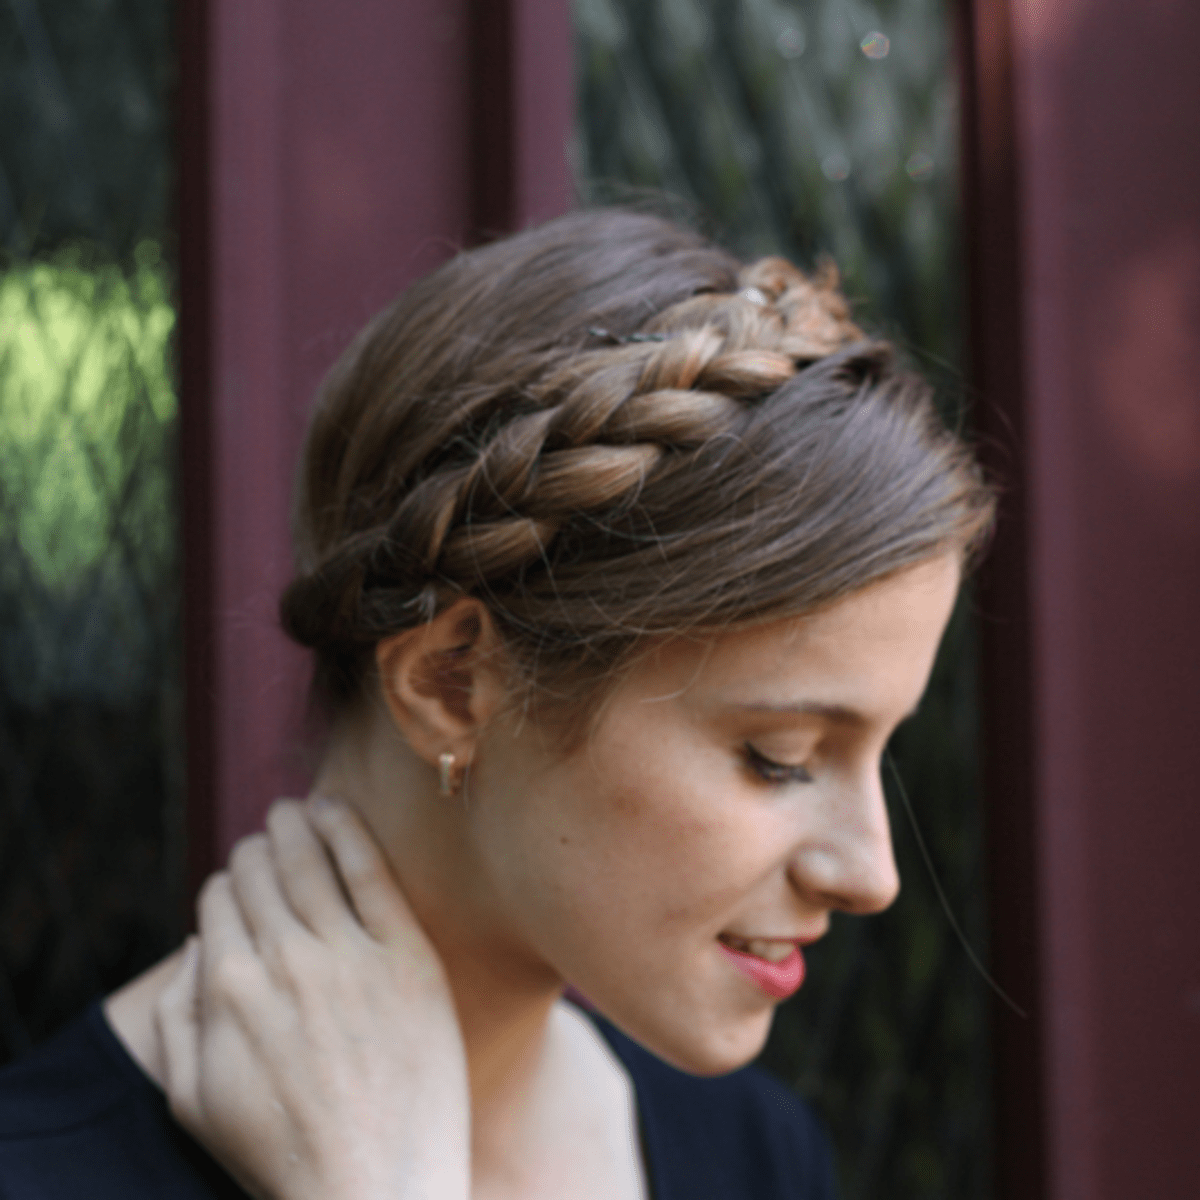 threads | (In)famous Christian hairstyles of the world